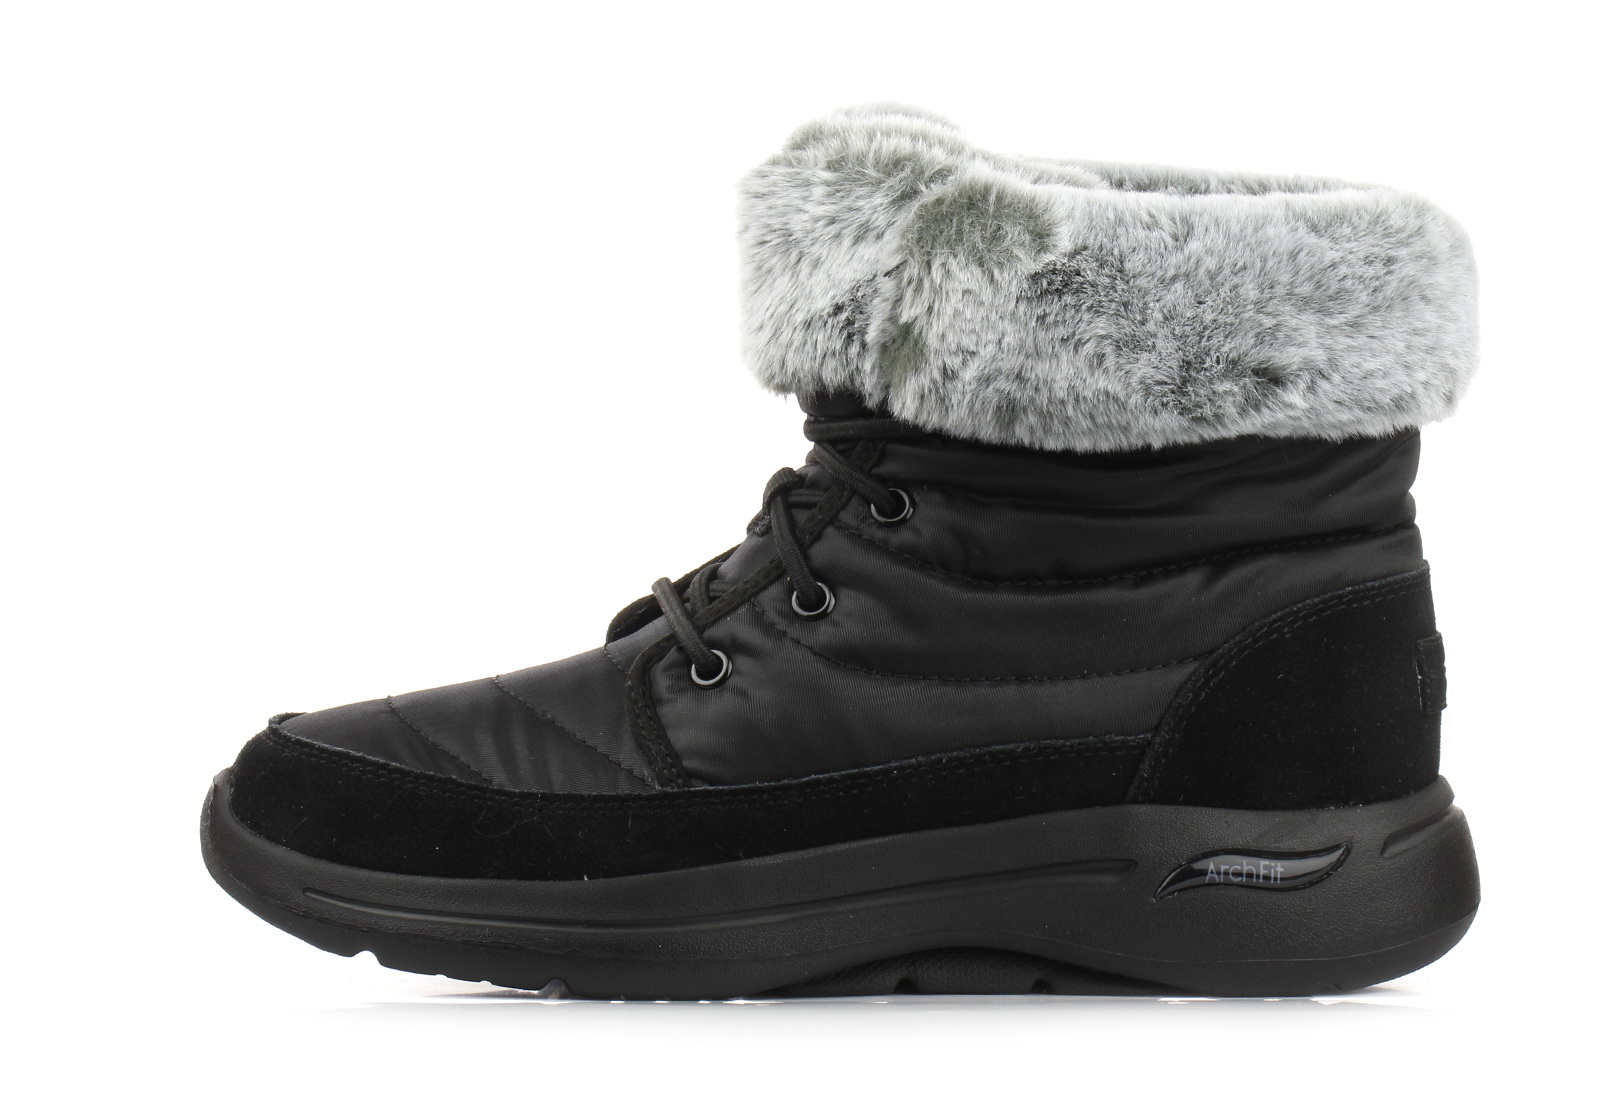 Skechers Boots - Go Walk Arch Fit-winter Vibes - 144409-BKGY - Online ...